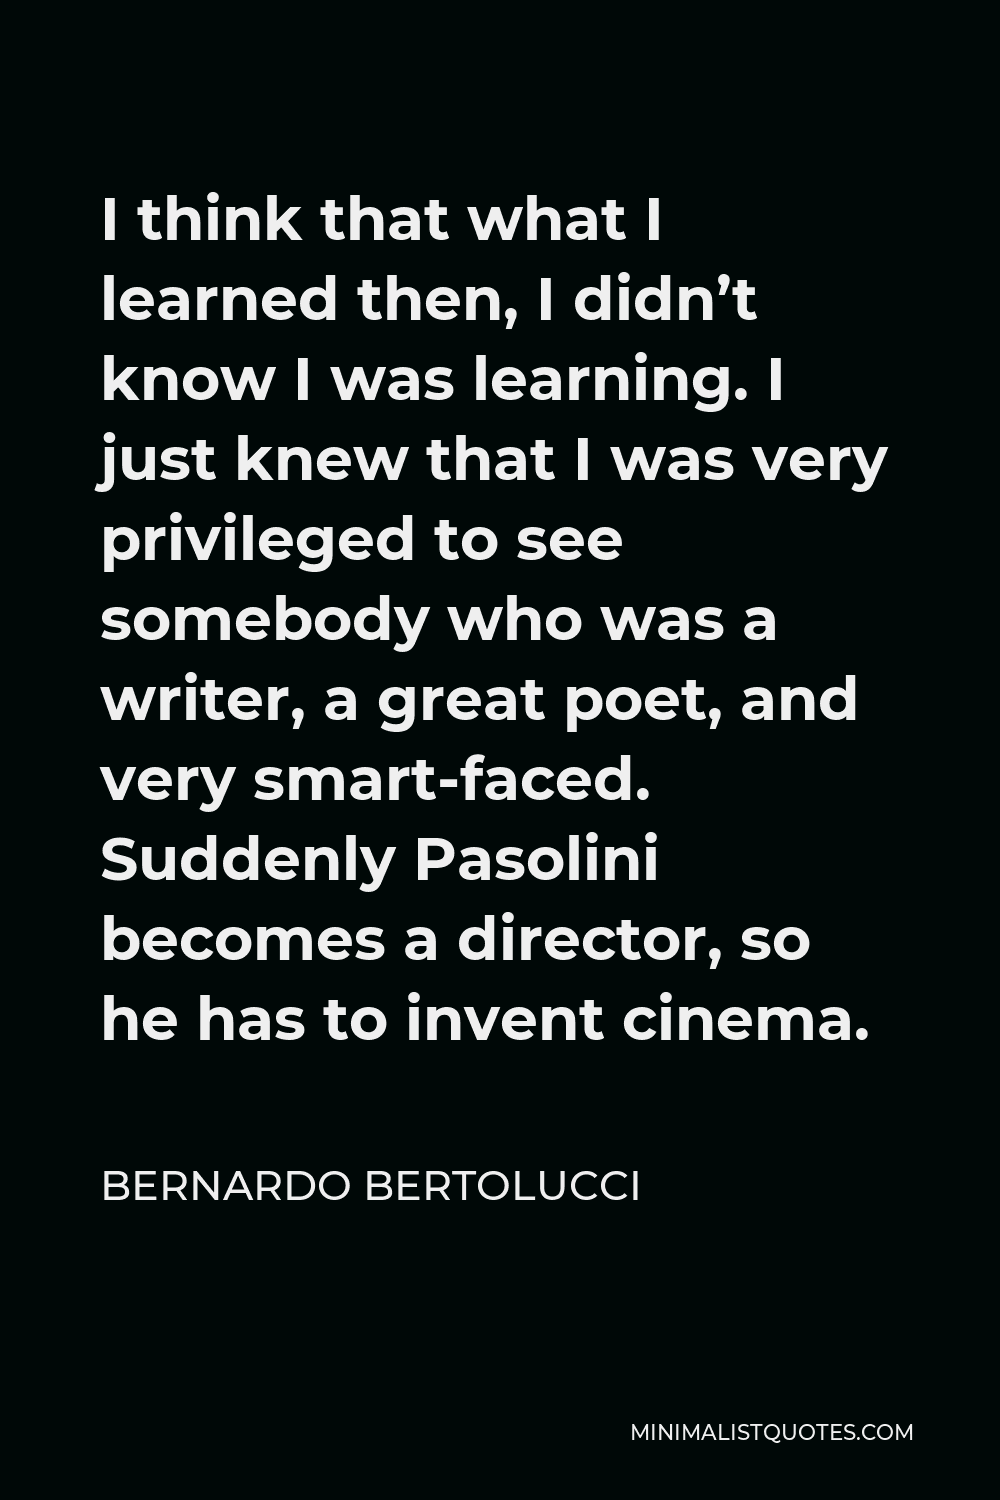 Bernardo Bertolucci Quote - I think that what I learned then, I didn’t know I was learning. I just knew that I was very privileged to see somebody who was a writer, a great poet, and very smart-faced. Suddenly Pasolini becomes a director, so he has to invent cinema.